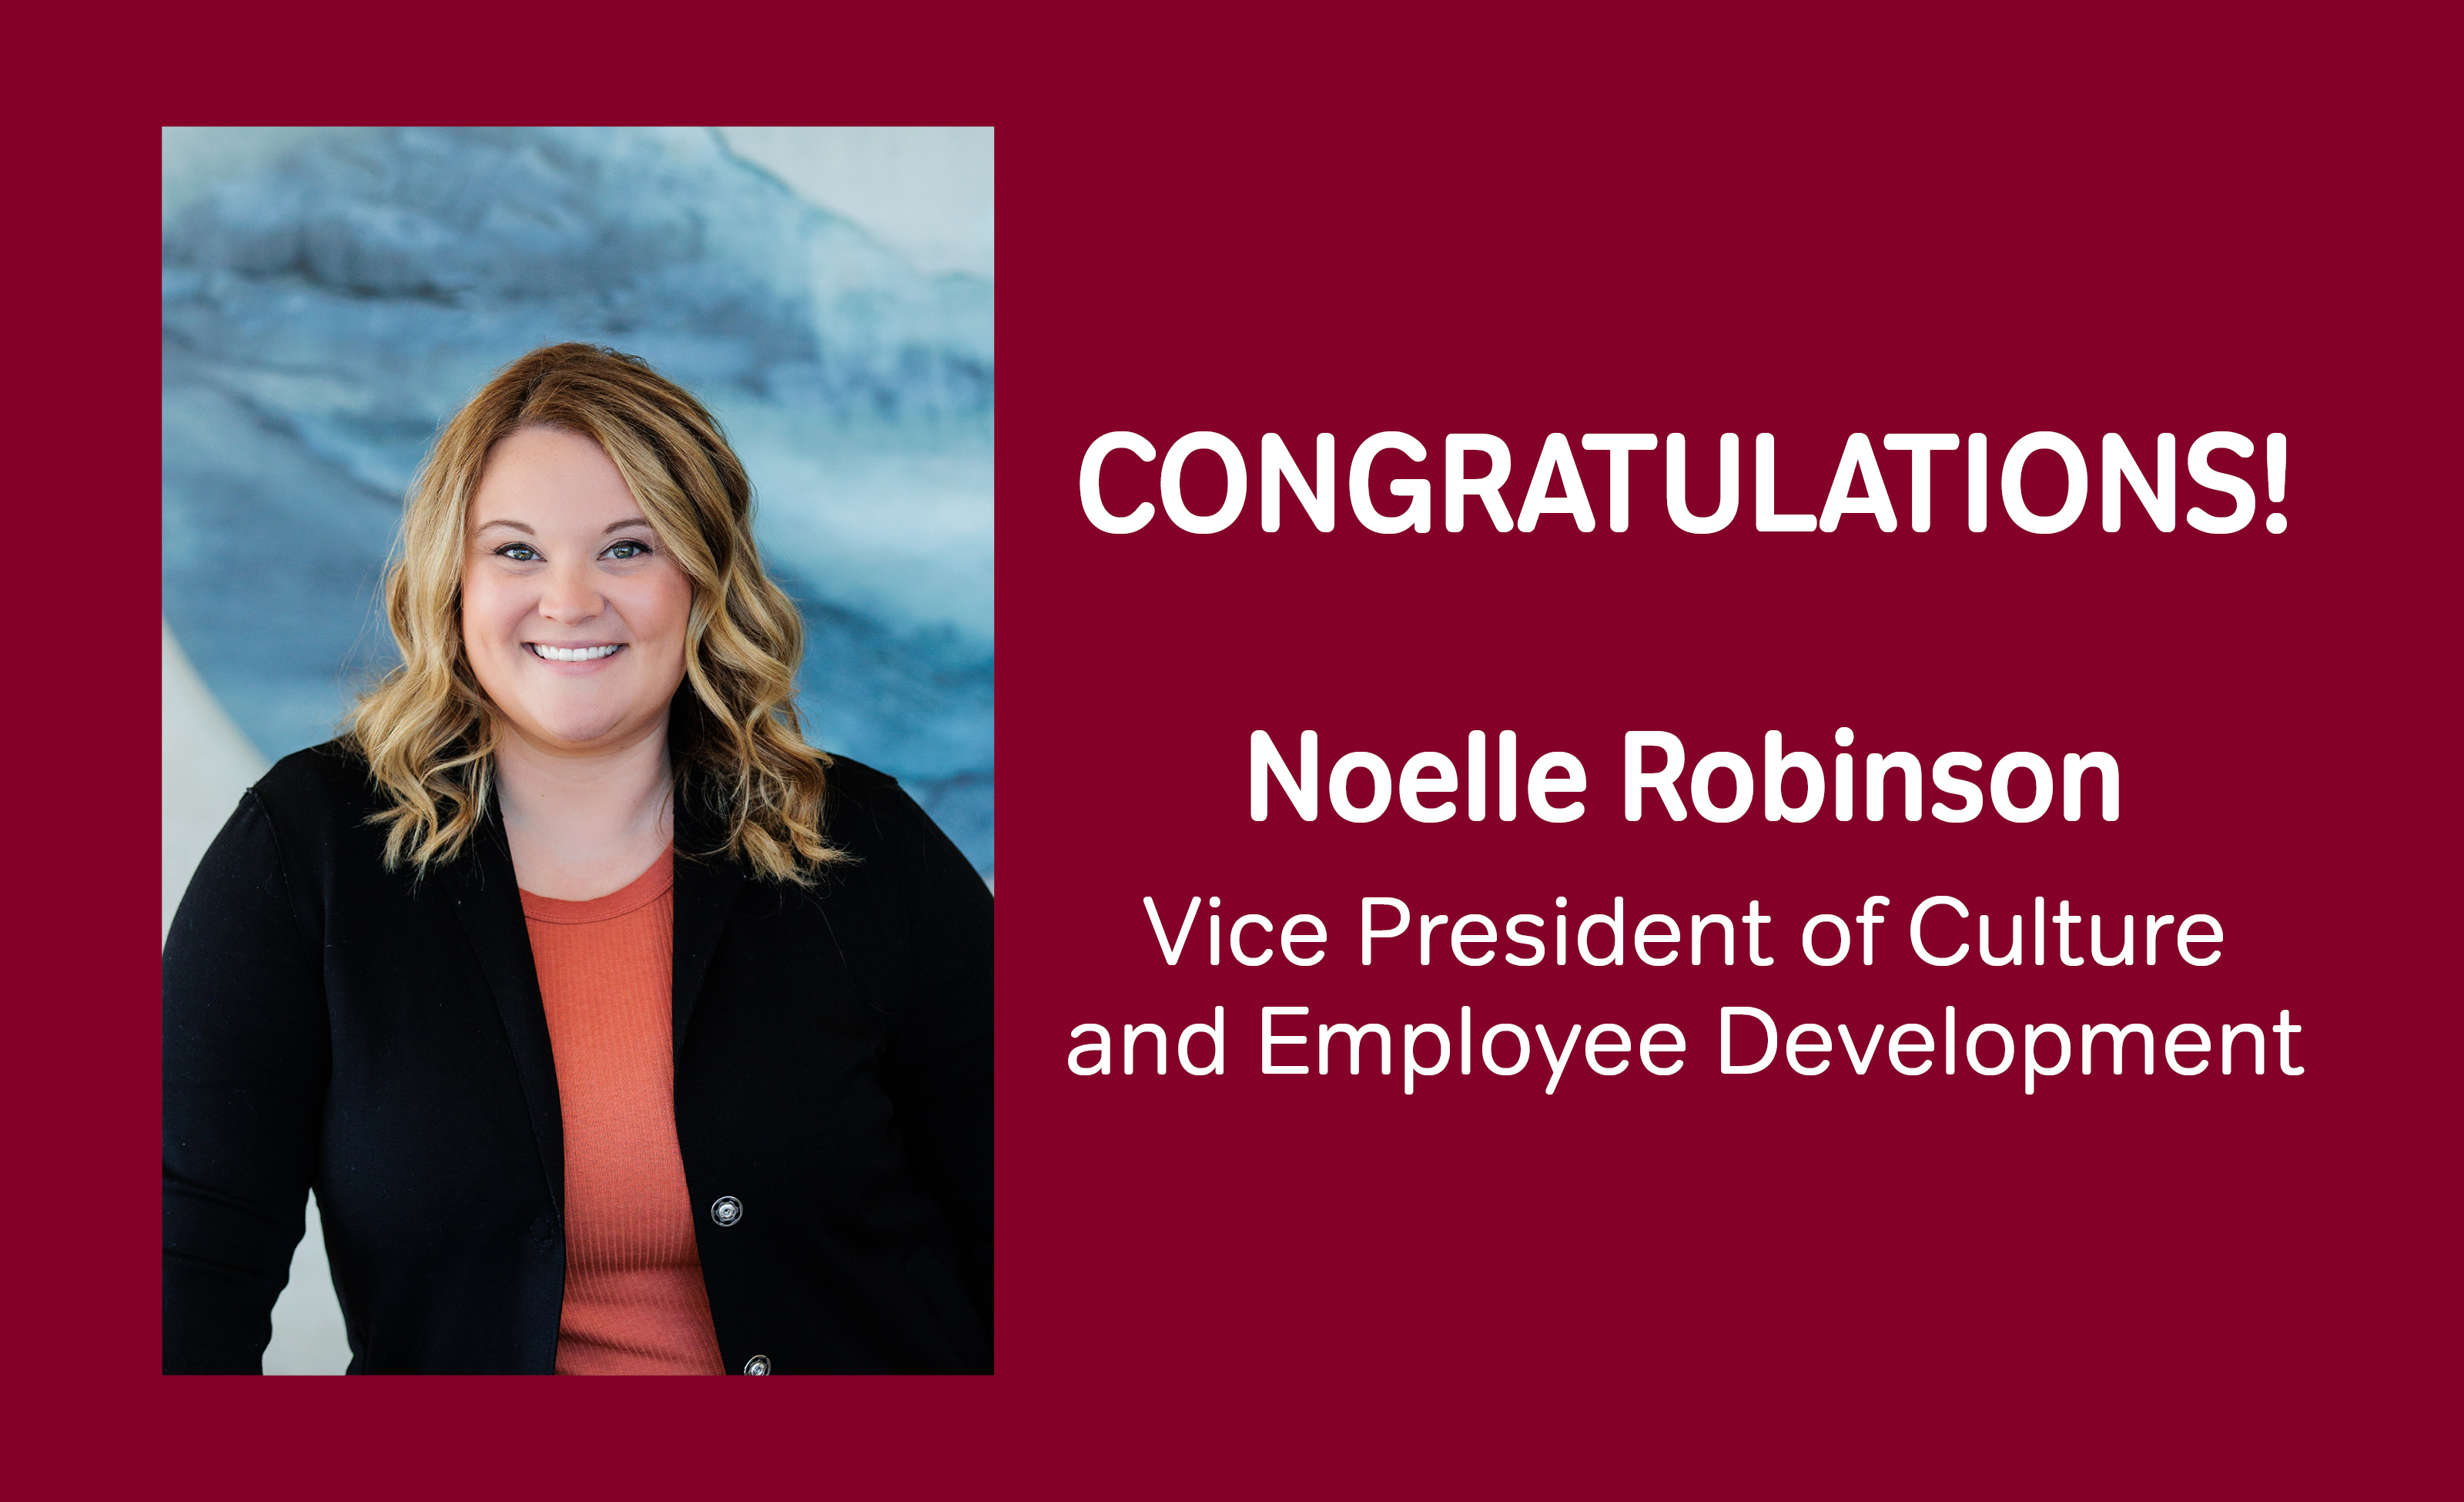 Noelle Robinson - Vice President of Culture and Employee Development